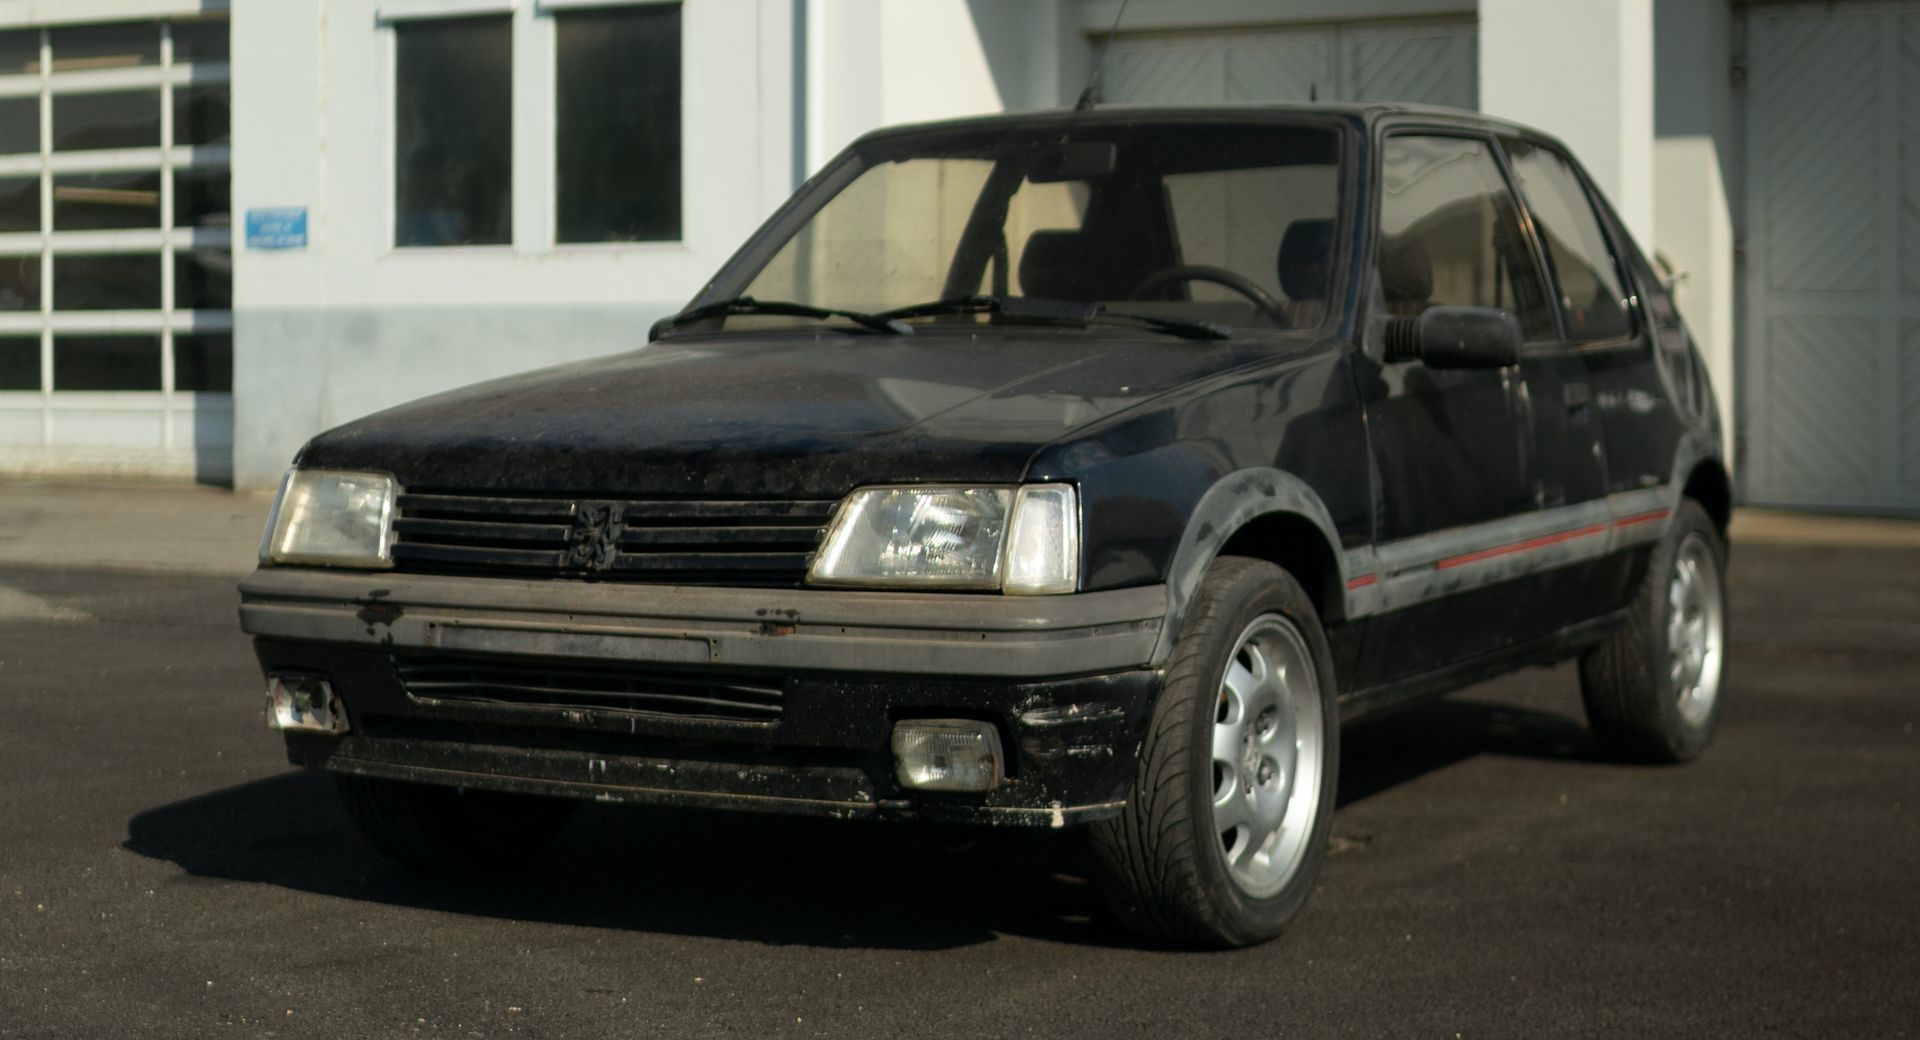 Doe herleven Dubbelzinnigheid Automatisch Peugeot Will Restore And Sell This 205 GTi 1.9, Petrolheads Rejoice |  Carscoops